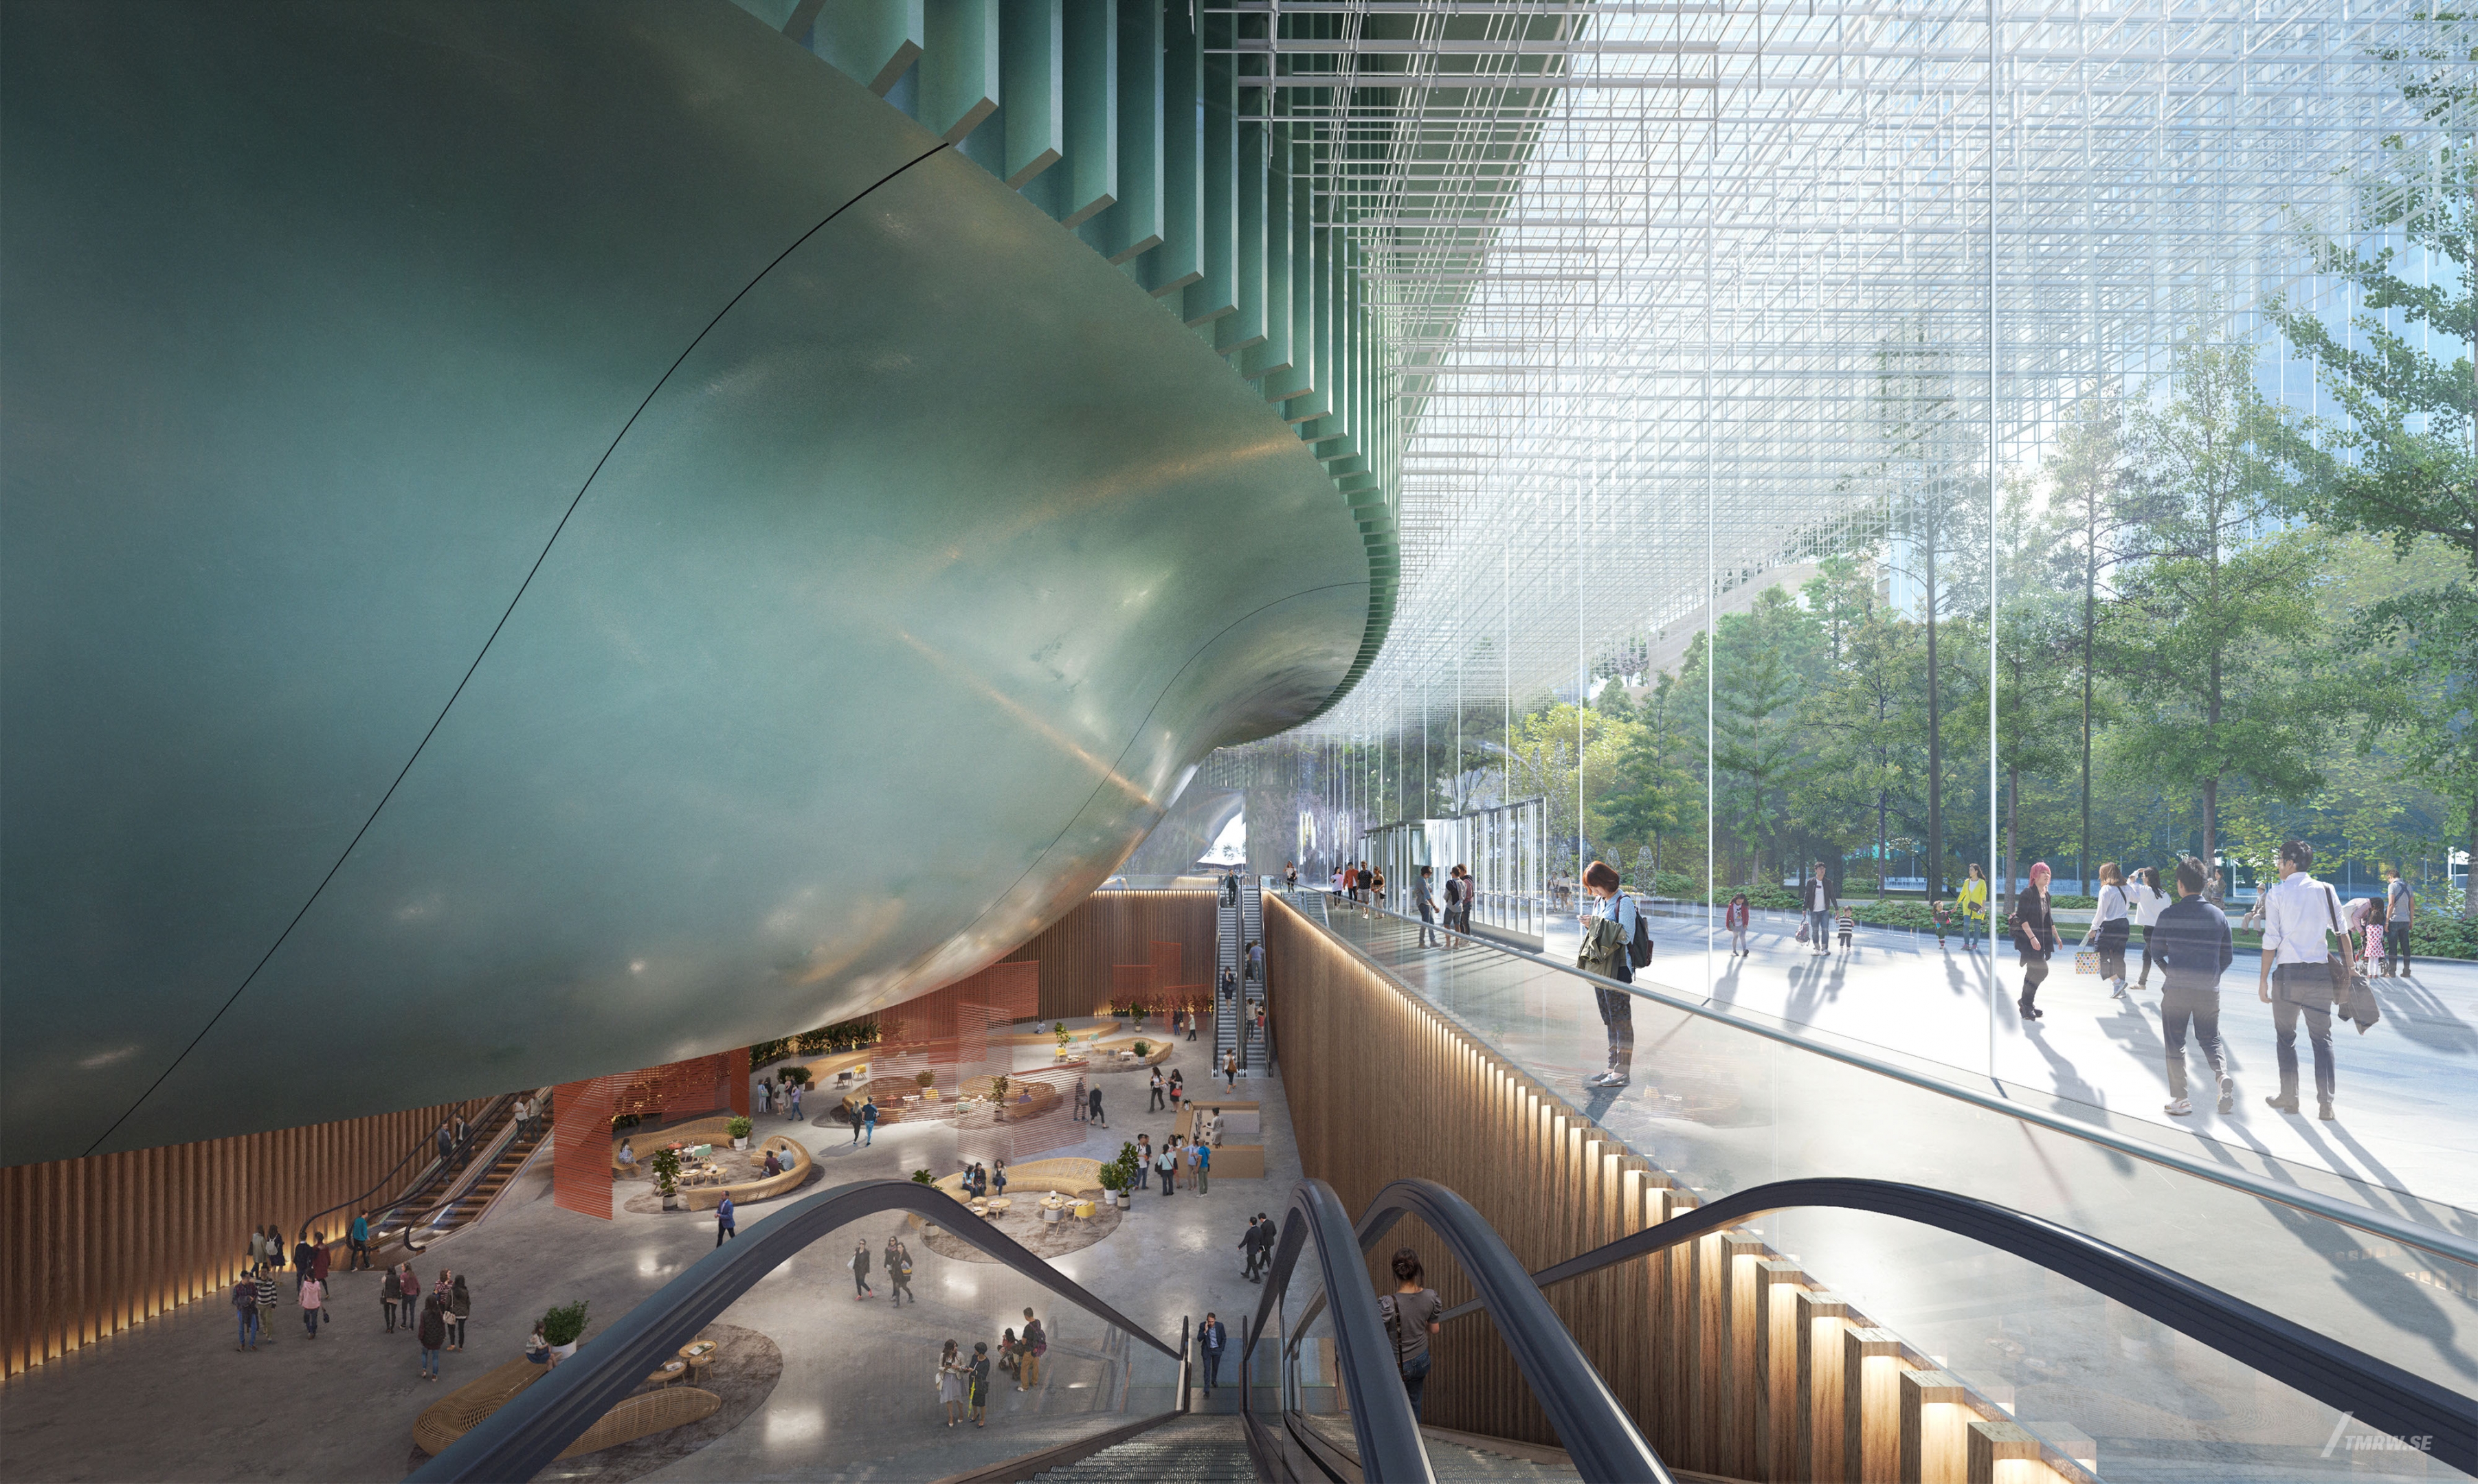 Architectural visualization of Gangneung for SOM. An image of the interior of a office building with people walking around in daylight from street view.